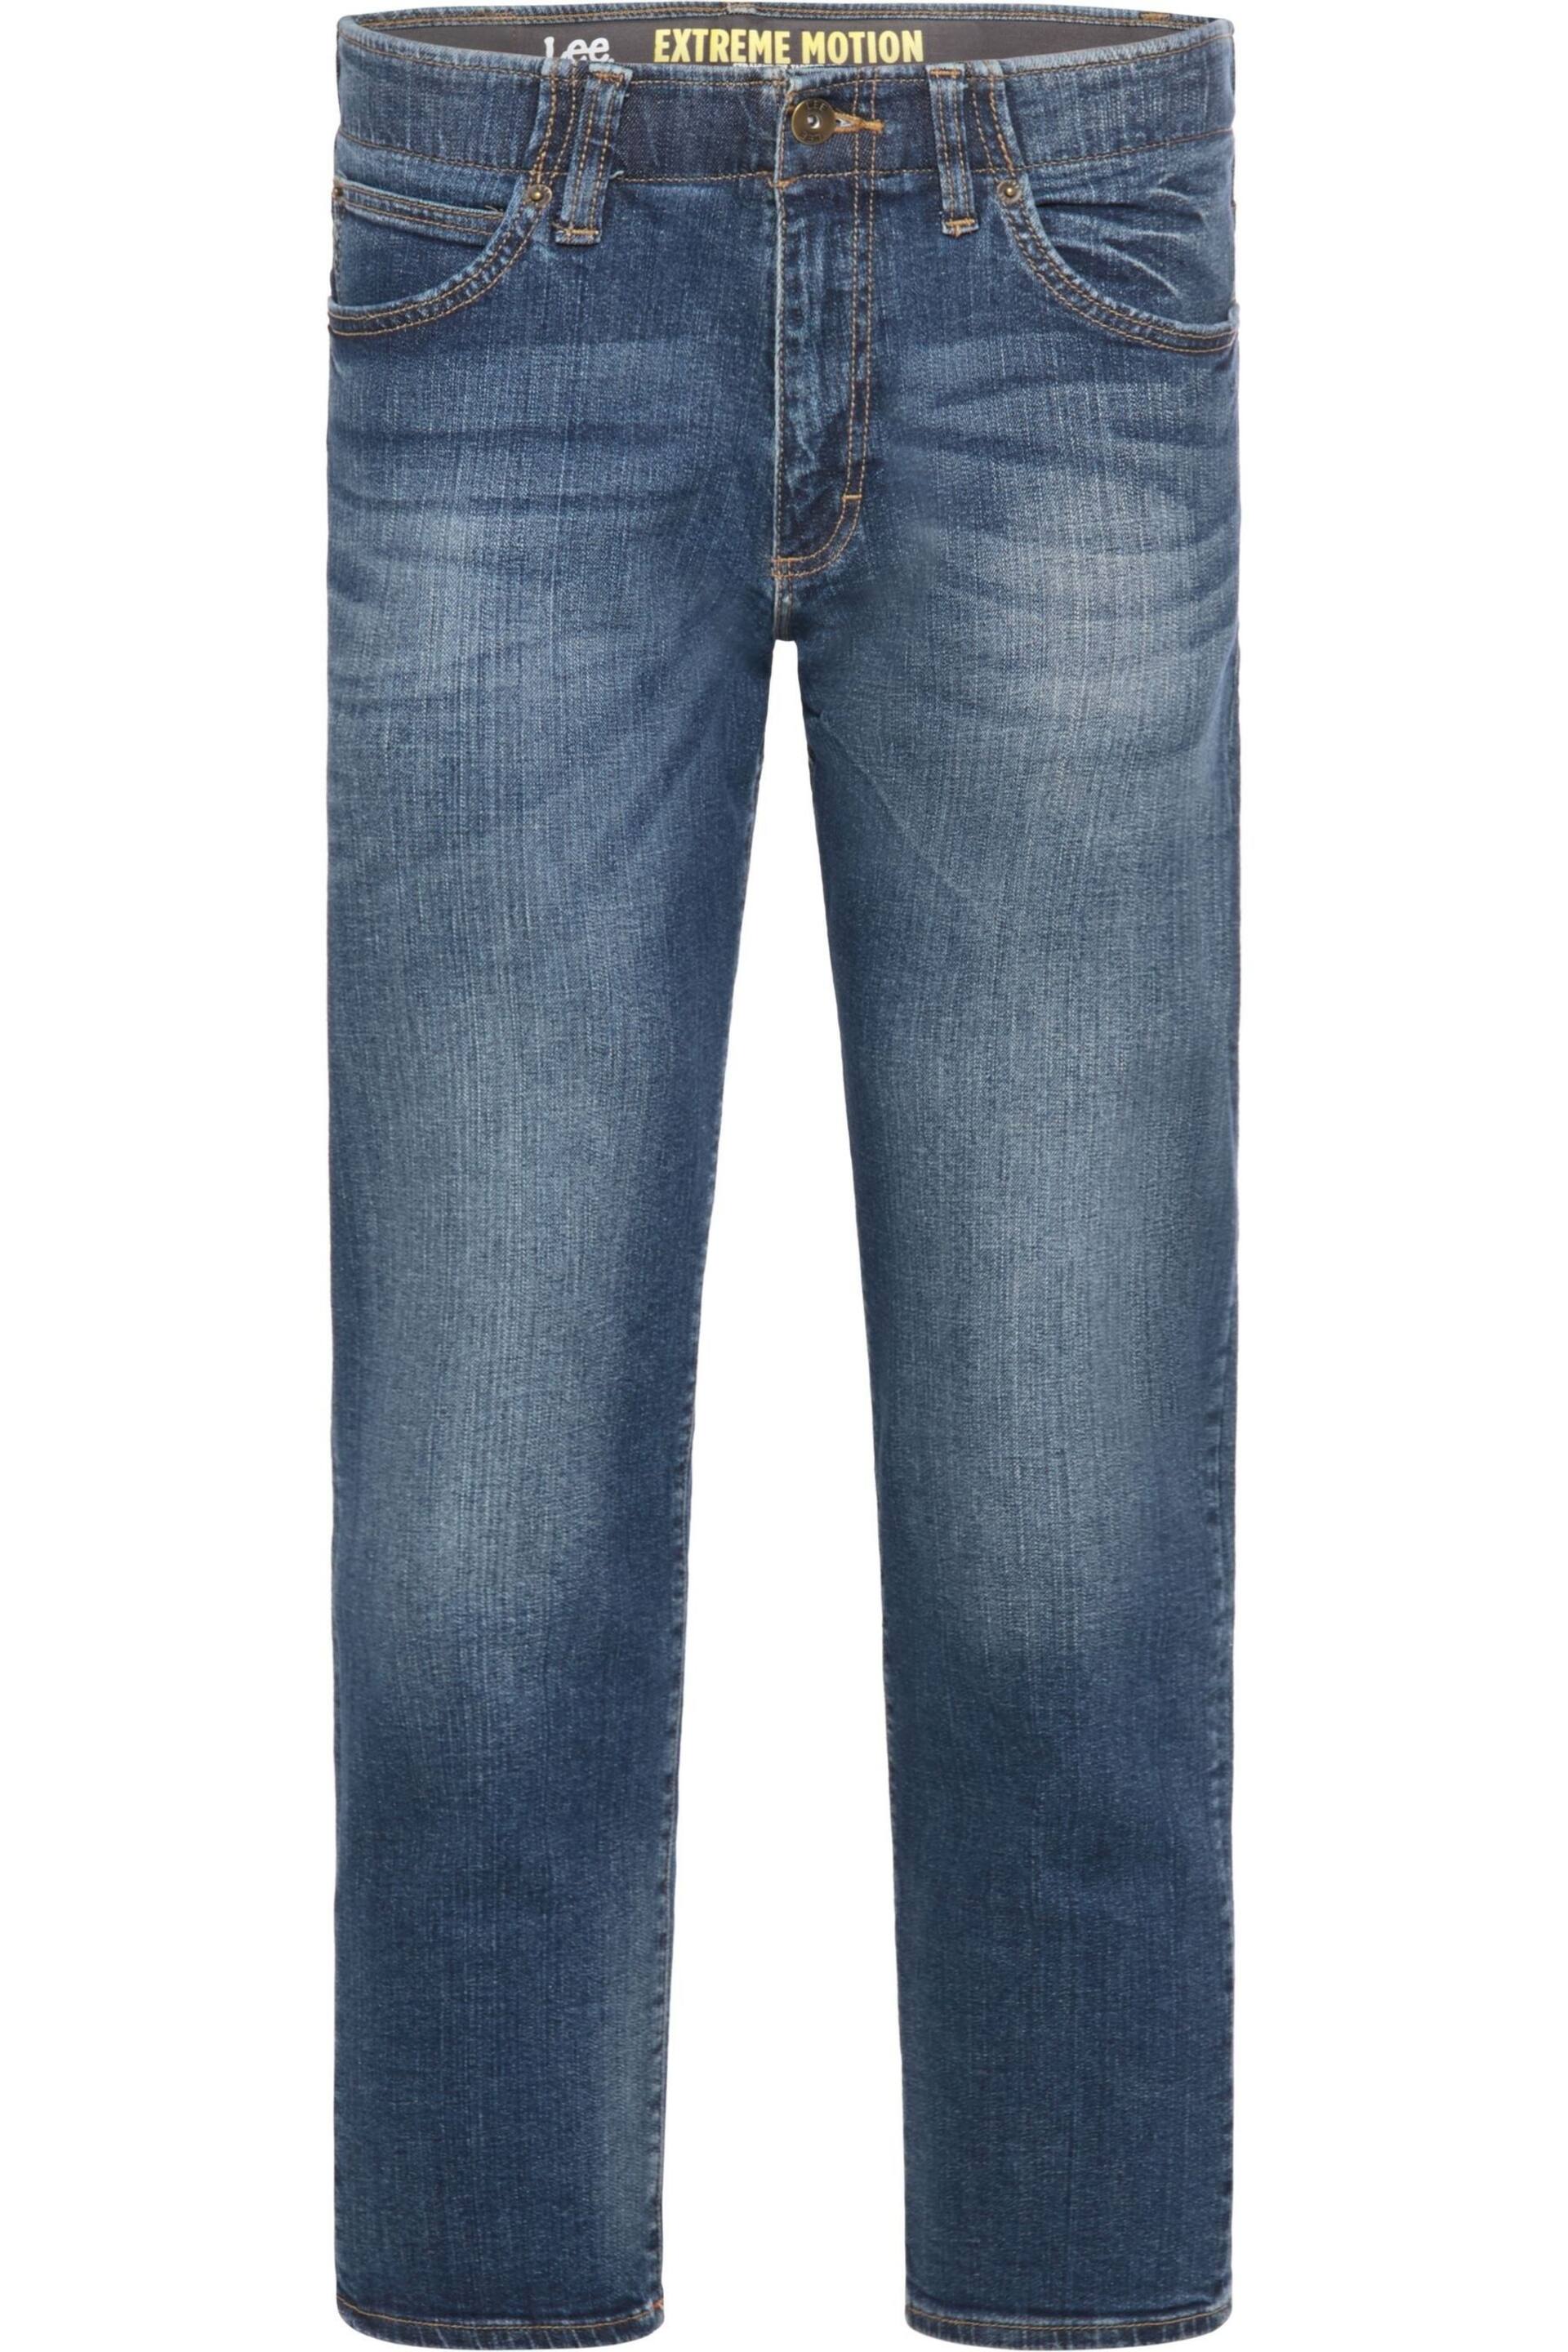 Lee Denim Extreme Motion Straight Fit Jeans - Image 7 of 7